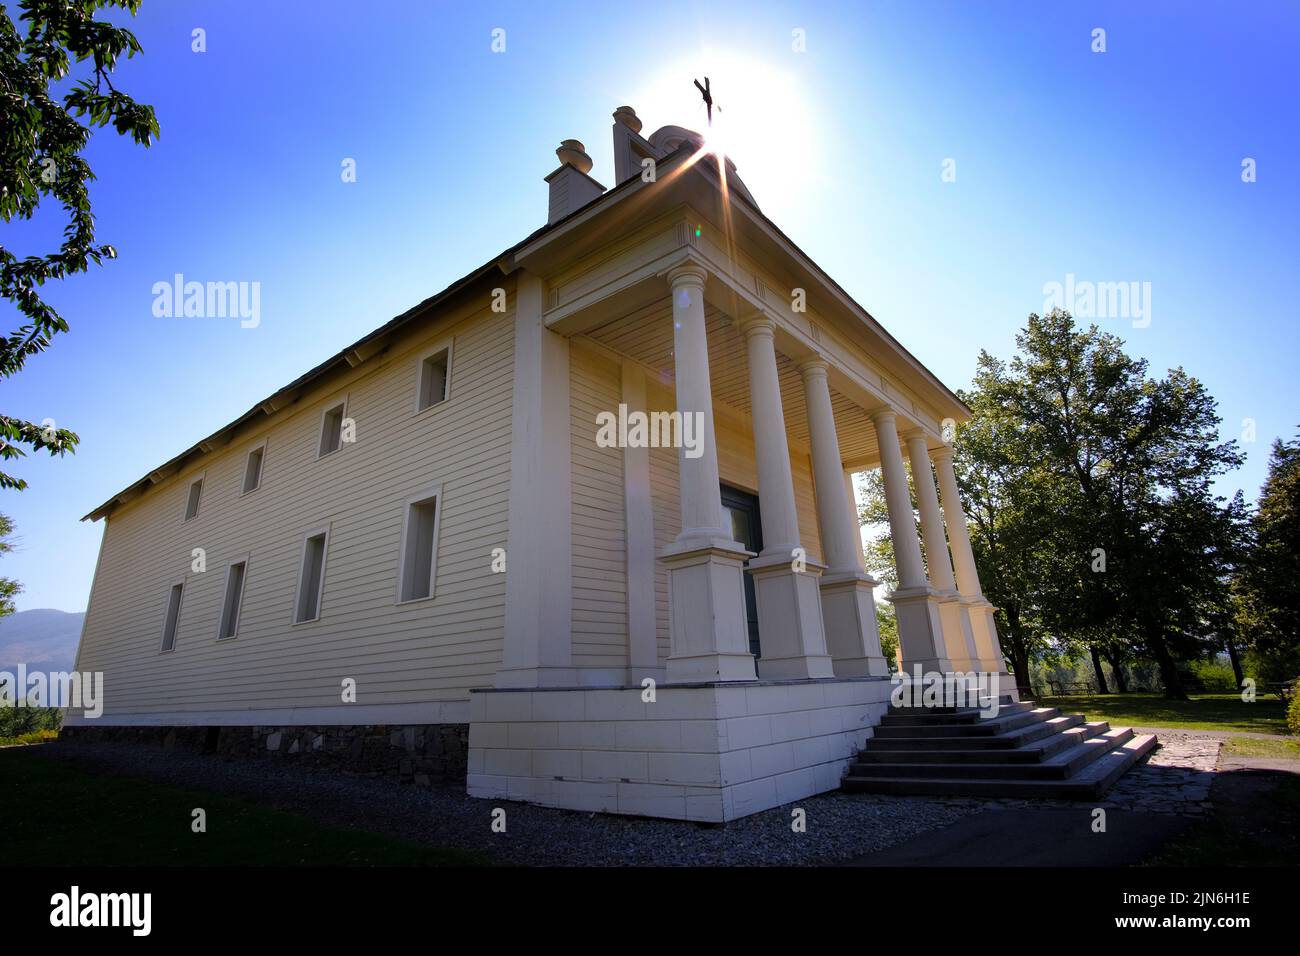 Old Idaho Cataldo Mission Church Building Structure in Northern Idaho Stock Photo